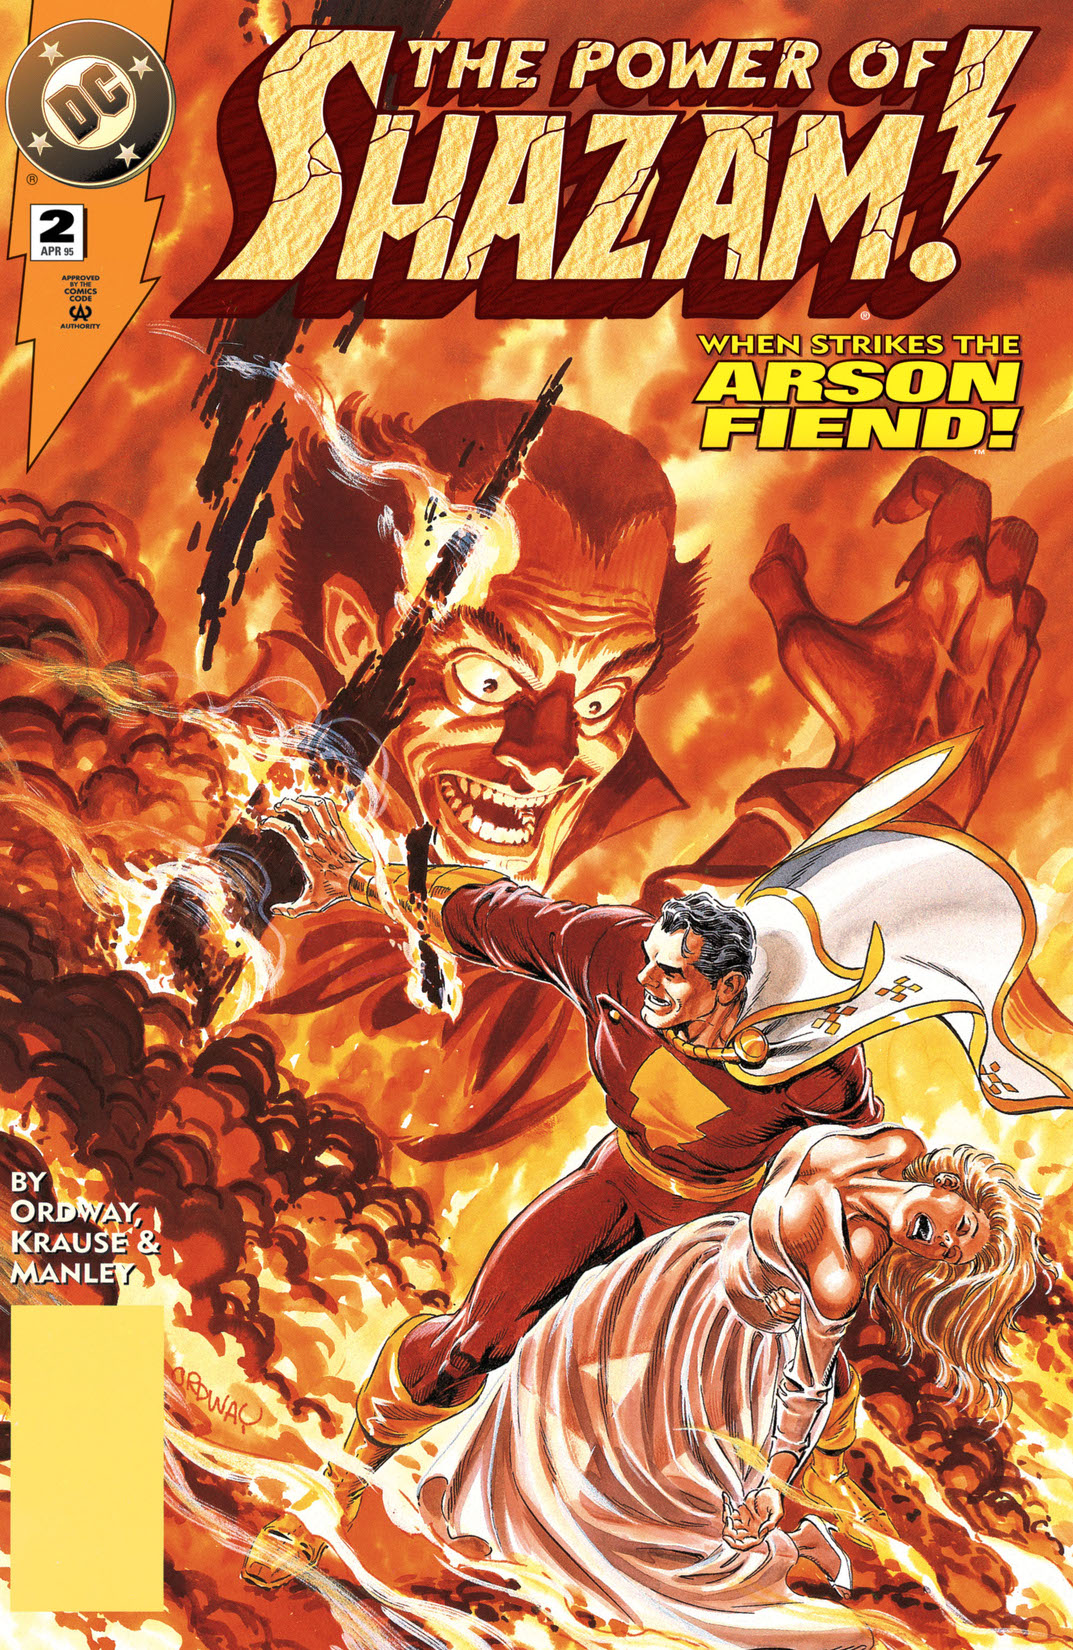 The Power of Shazam! #2 preview images